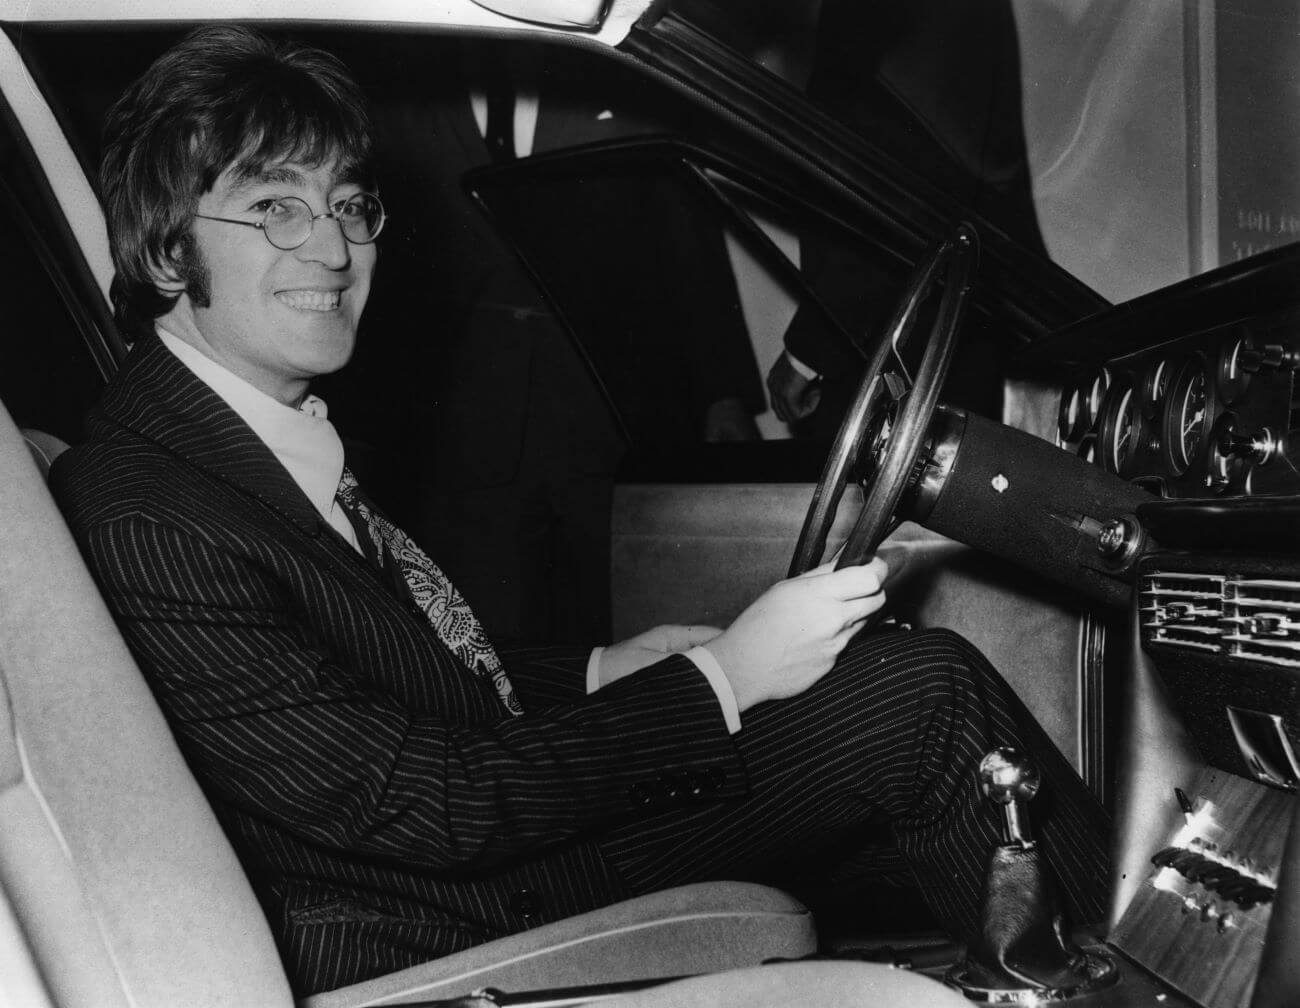 A black and white picture of John Lennon smiling while sitting behind the wheel of a car.